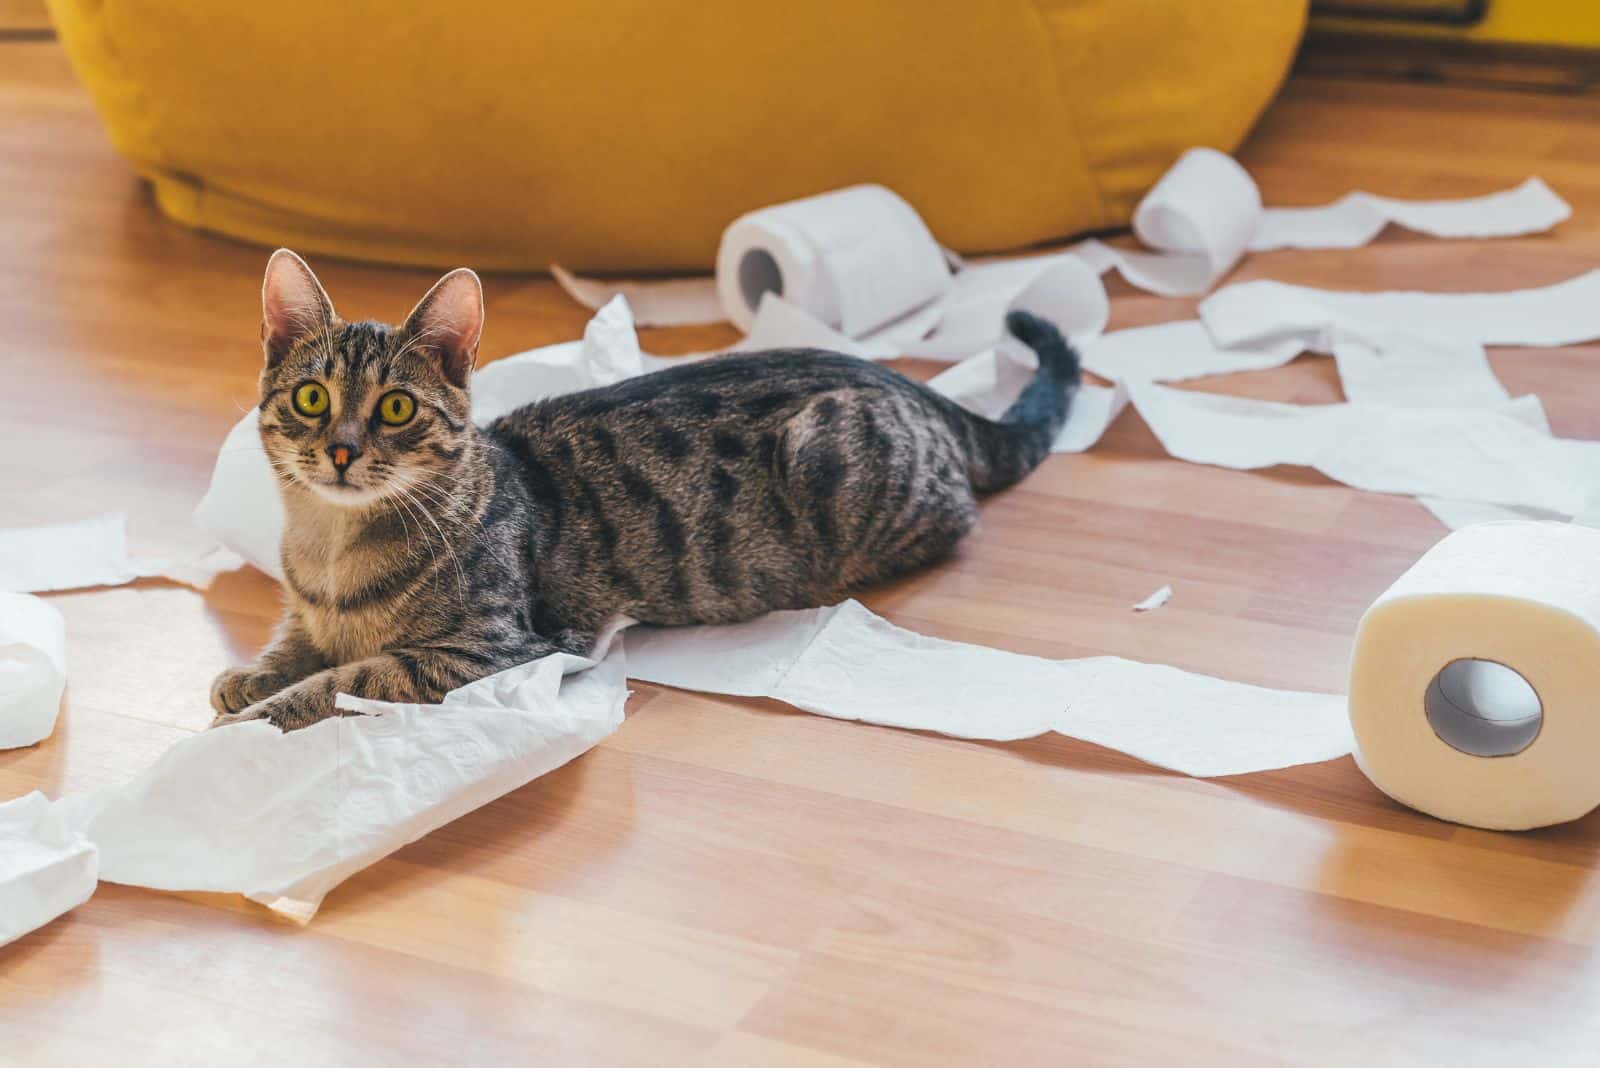 the cat made a mess with the toilet paper